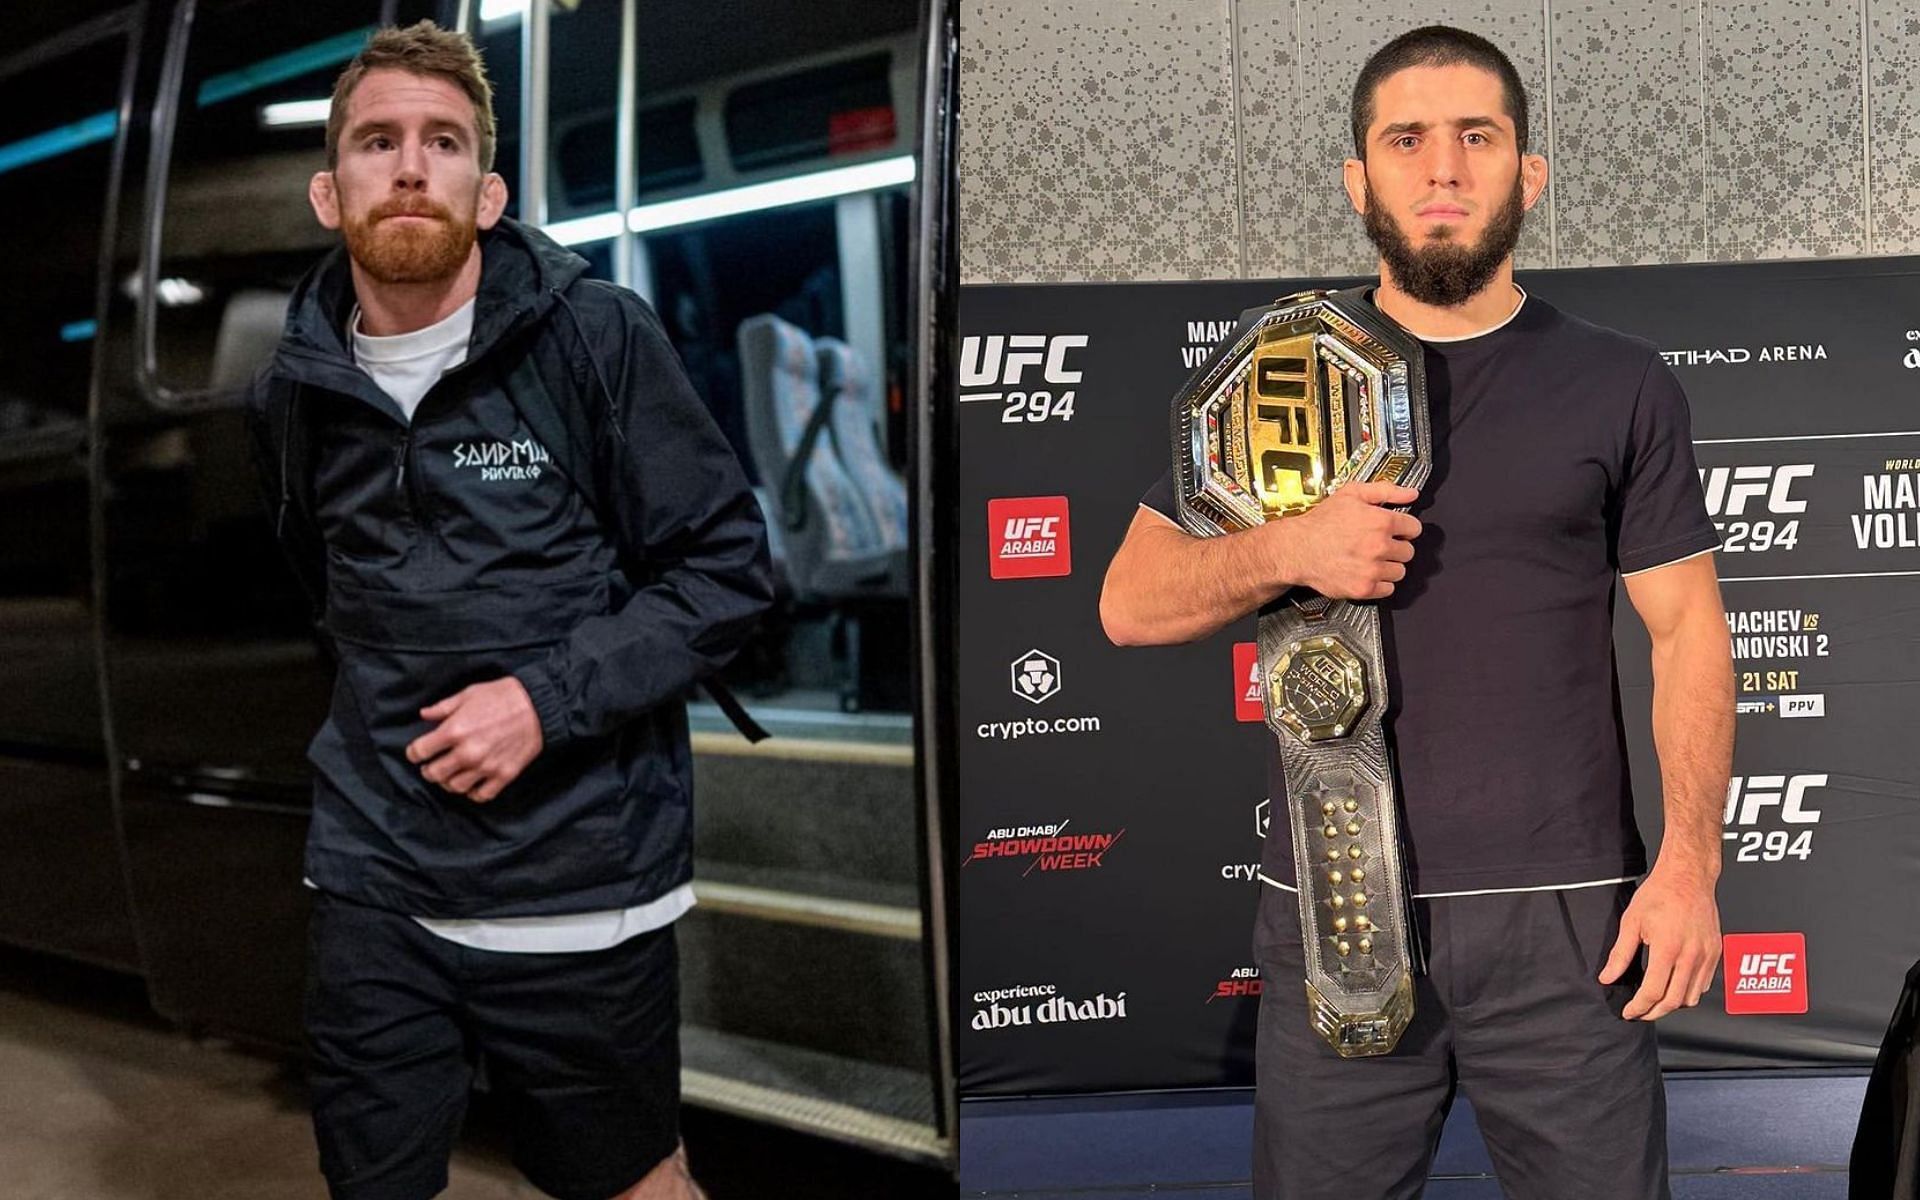 Cory Sandhagen (left) and Islam Makhachev (right) (Image credits @corysandhagenmma and @islam_makhachev on Instagram)